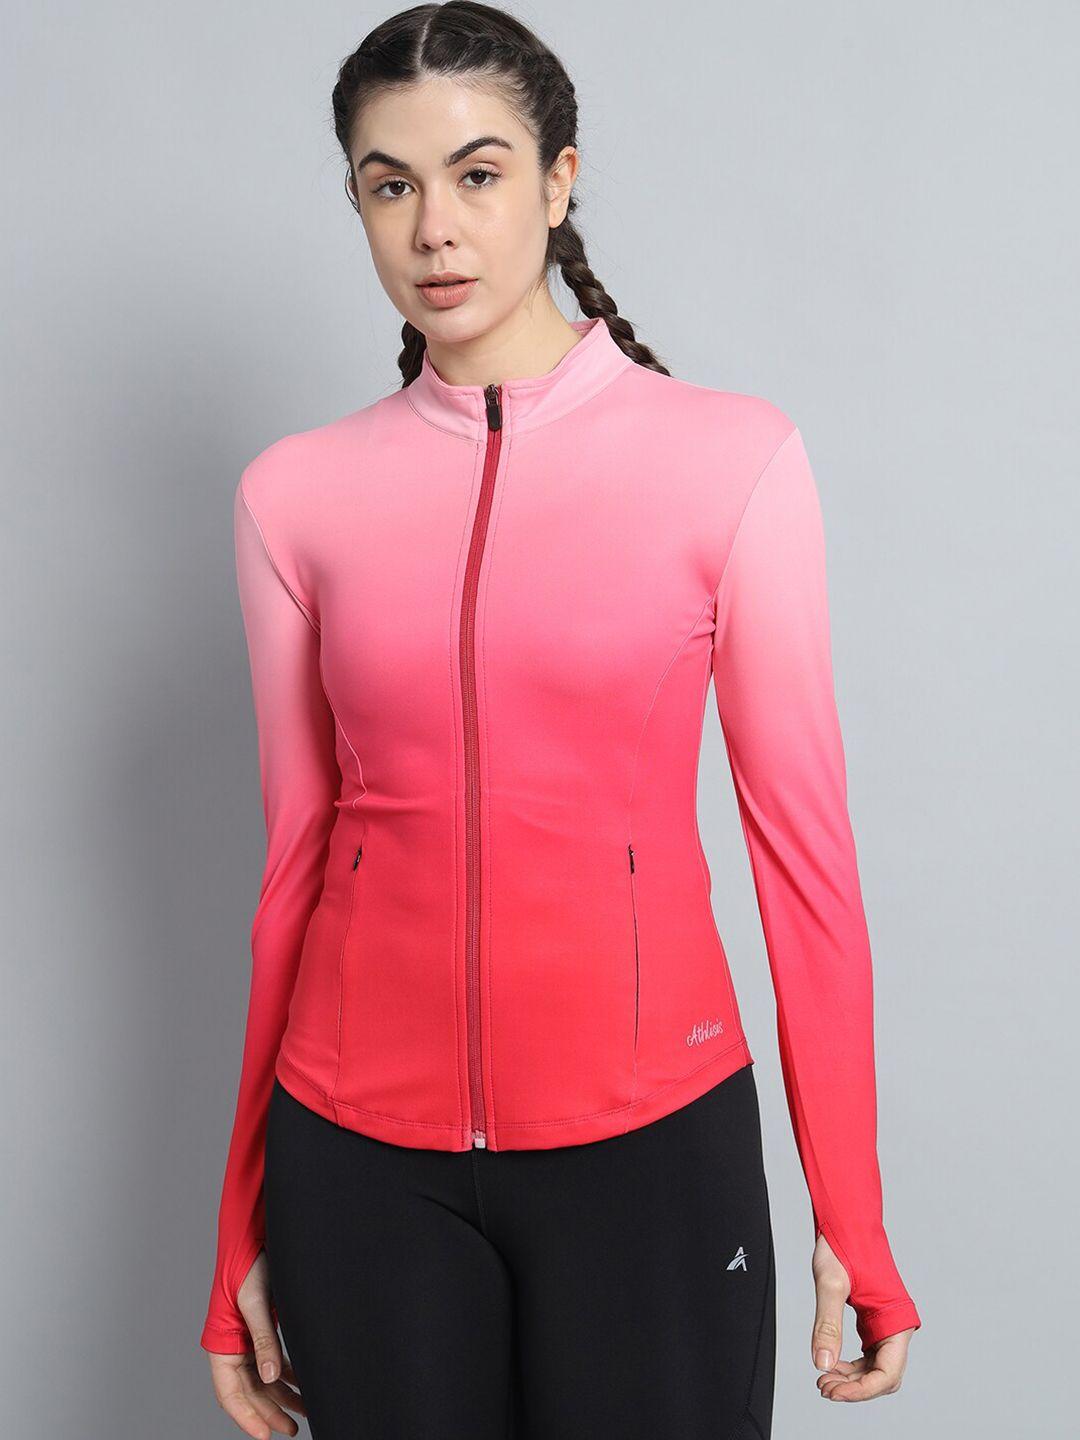 athlisis lightweight dry-fit training or gym sporty jacket